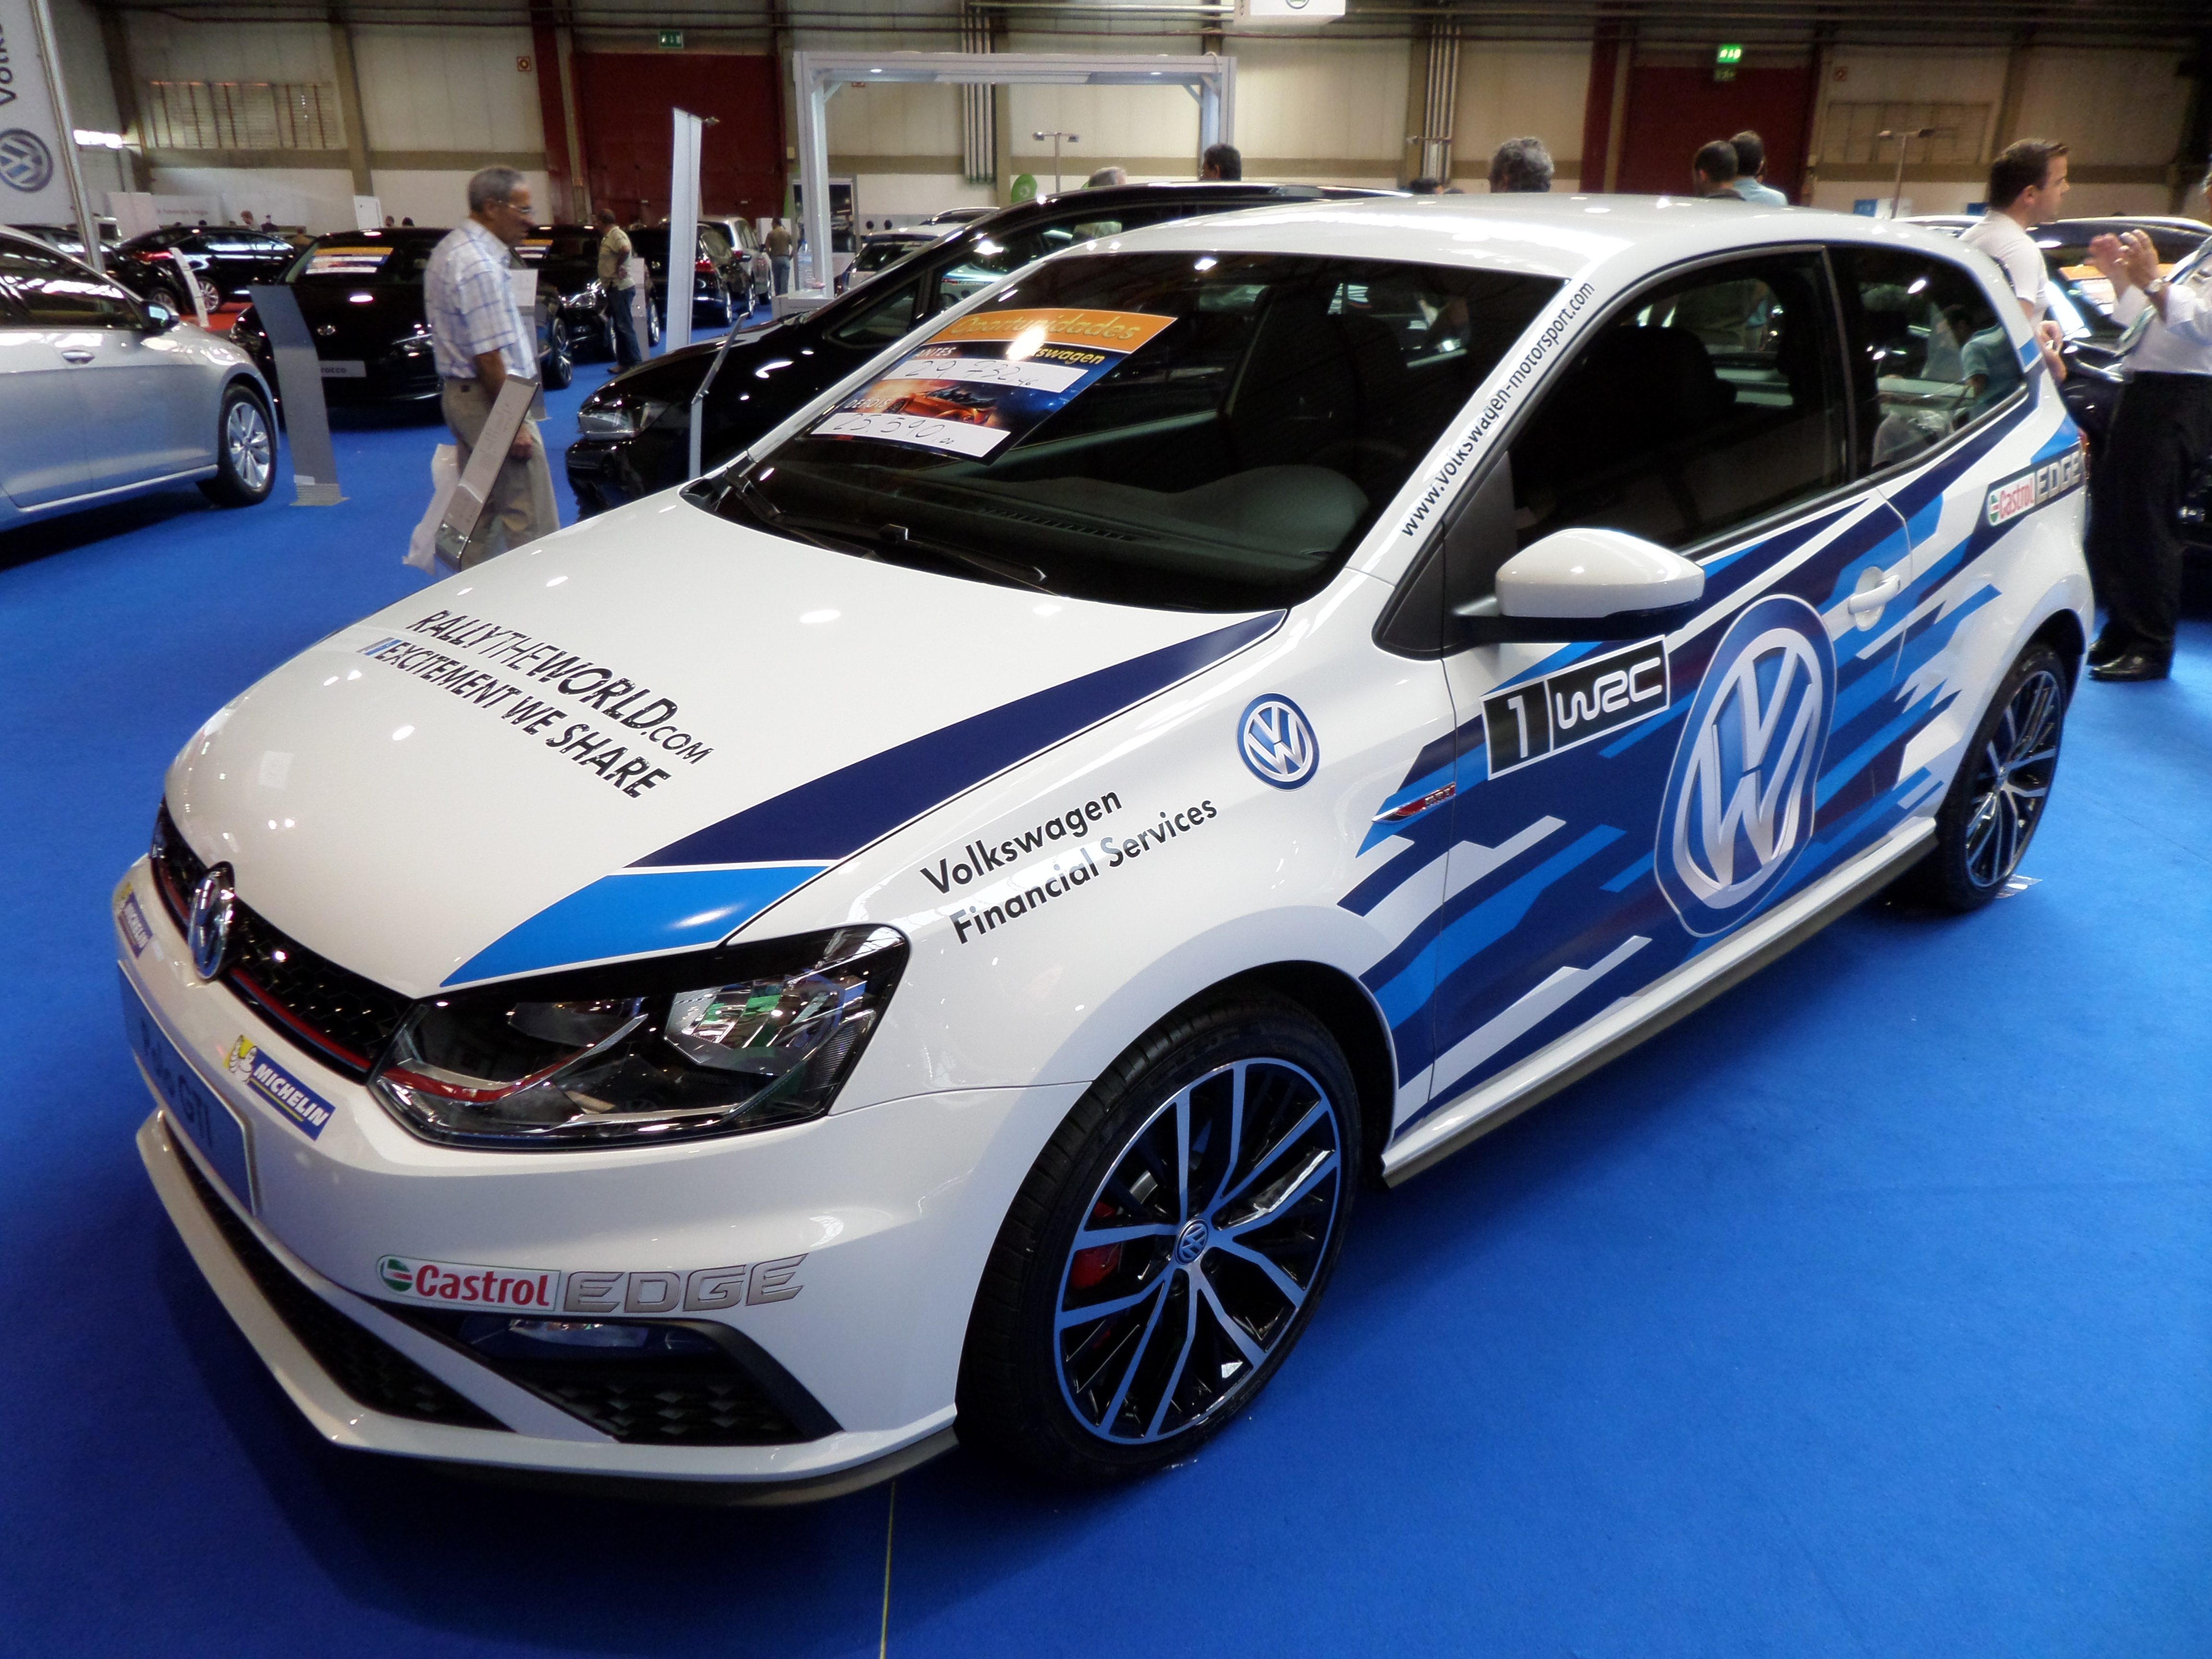 VW Polo GTI: Not a WRC, but you can get the livery to match one...